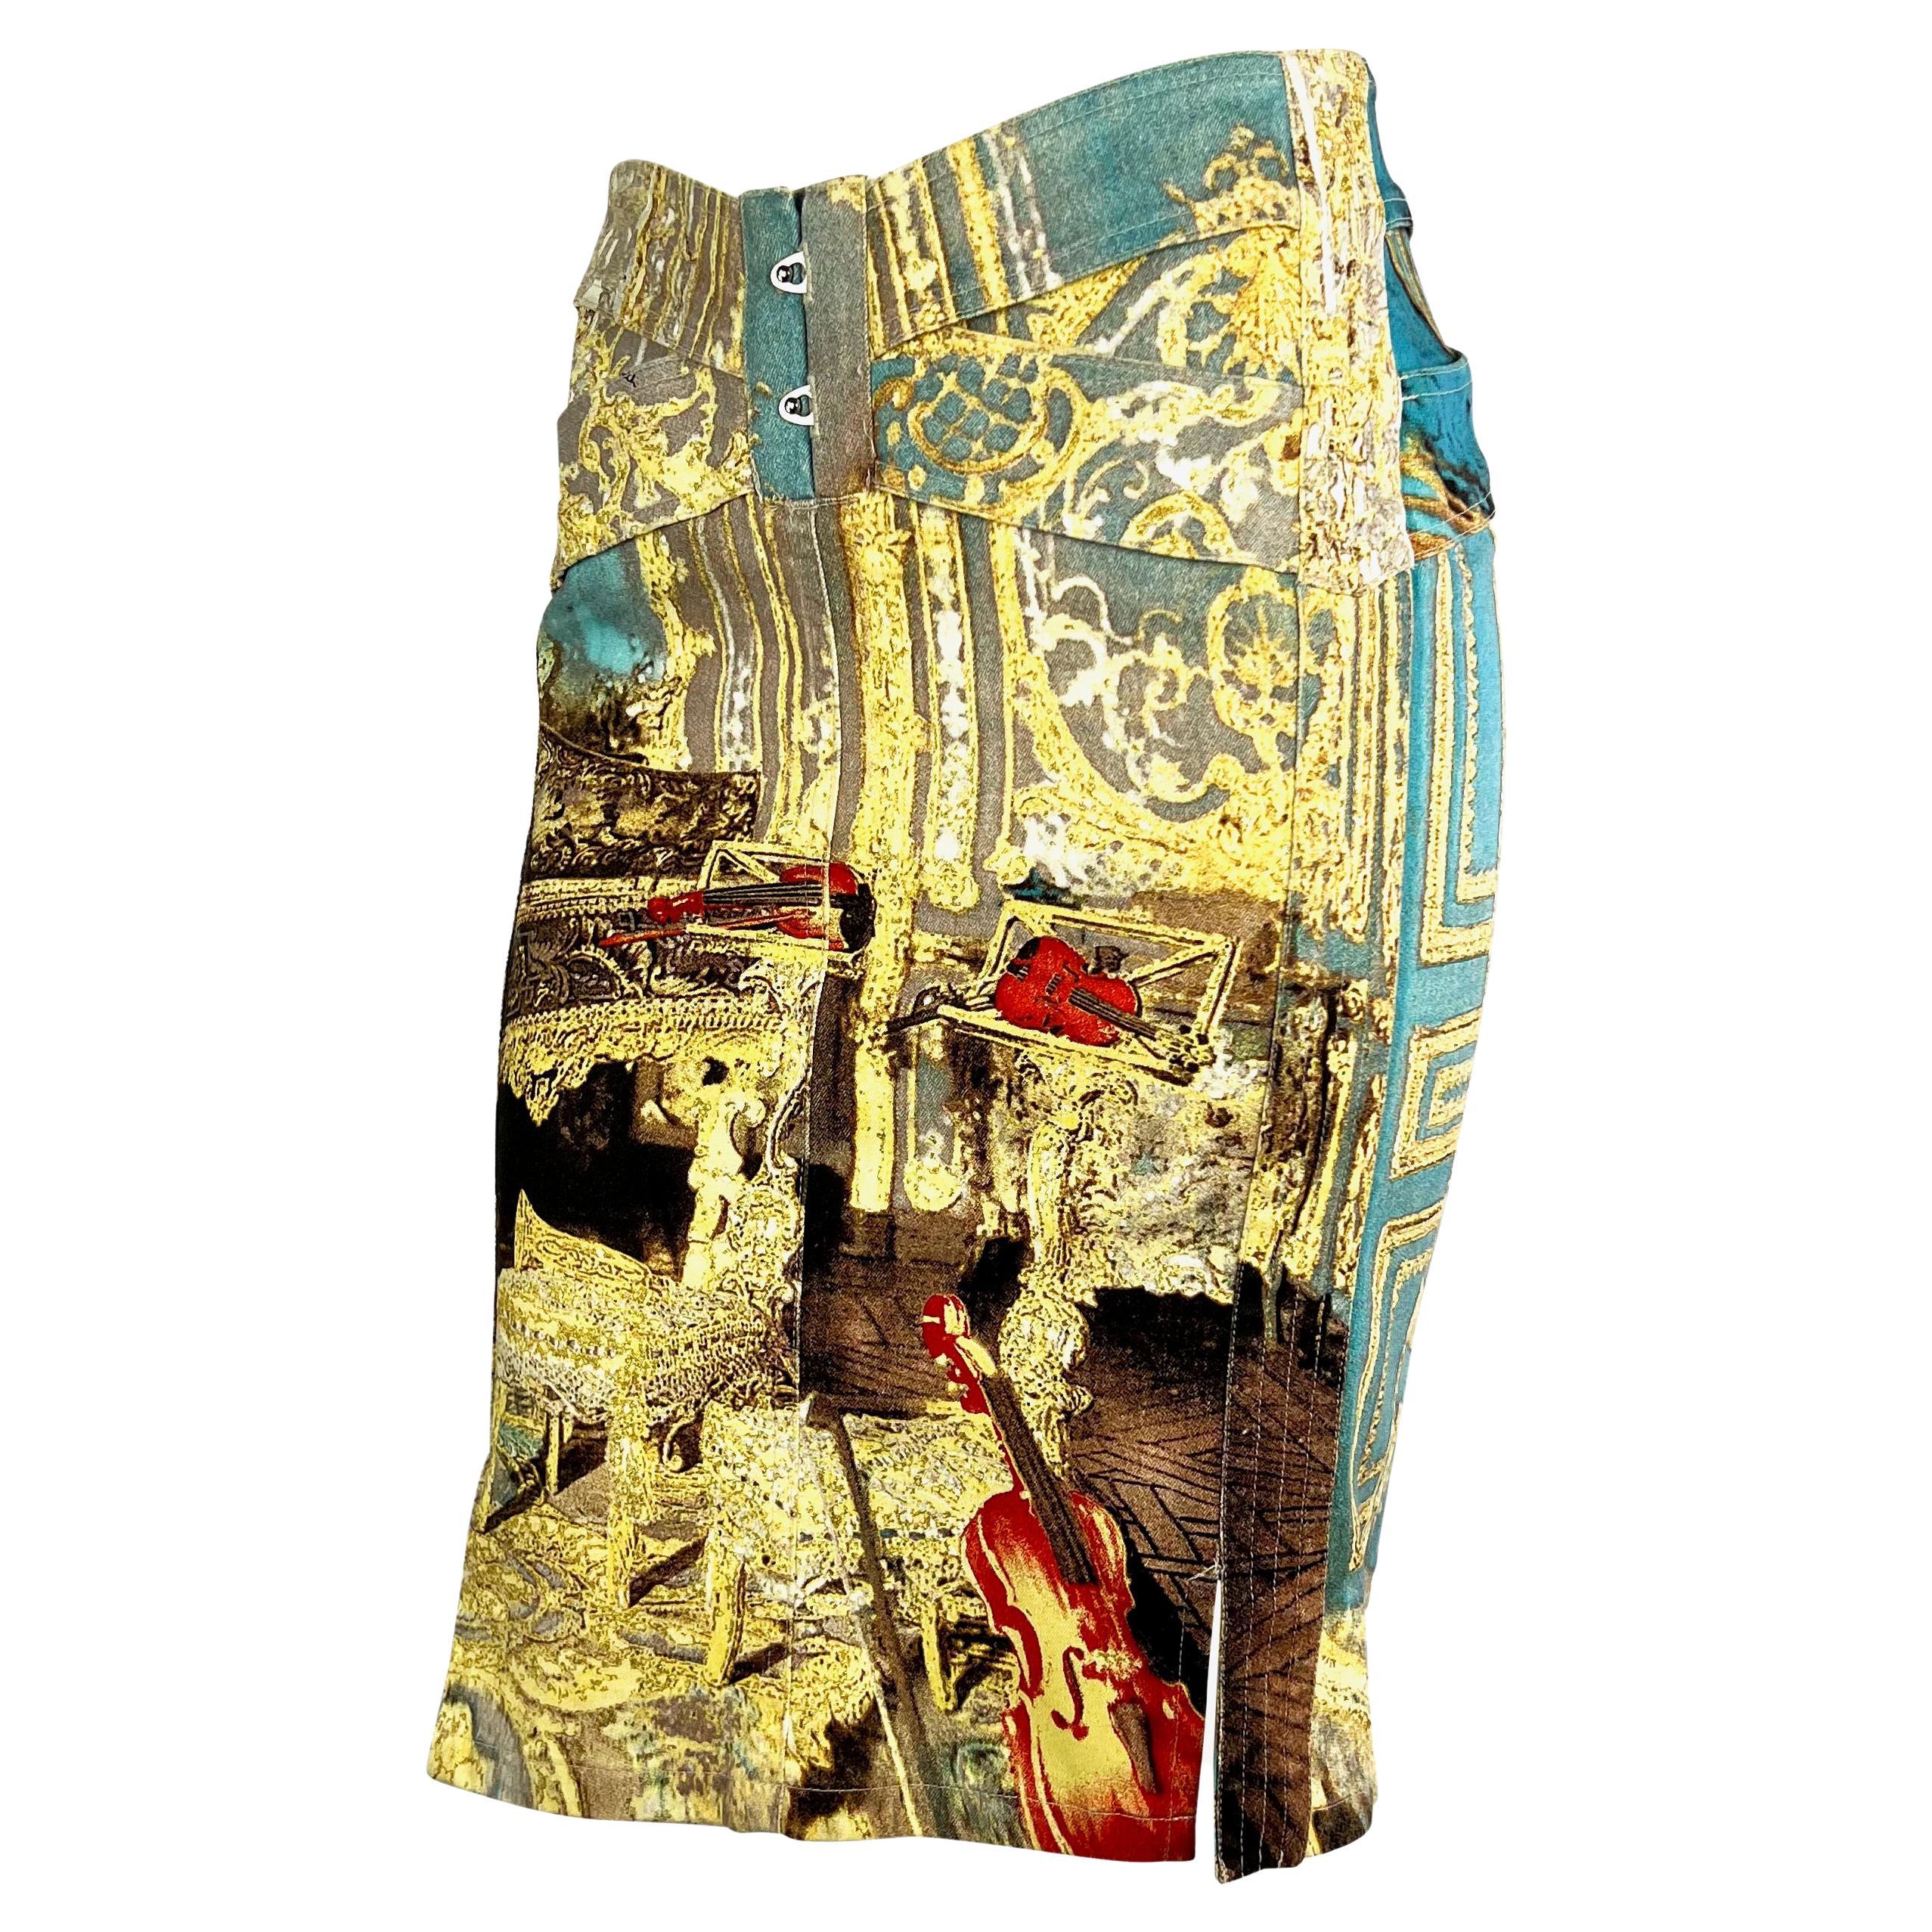 S/S 2003 Roberto Cavalli Baroque Printed Denim Corset Lace Up Skirt In Excellent Condition For Sale In West Hollywood, CA